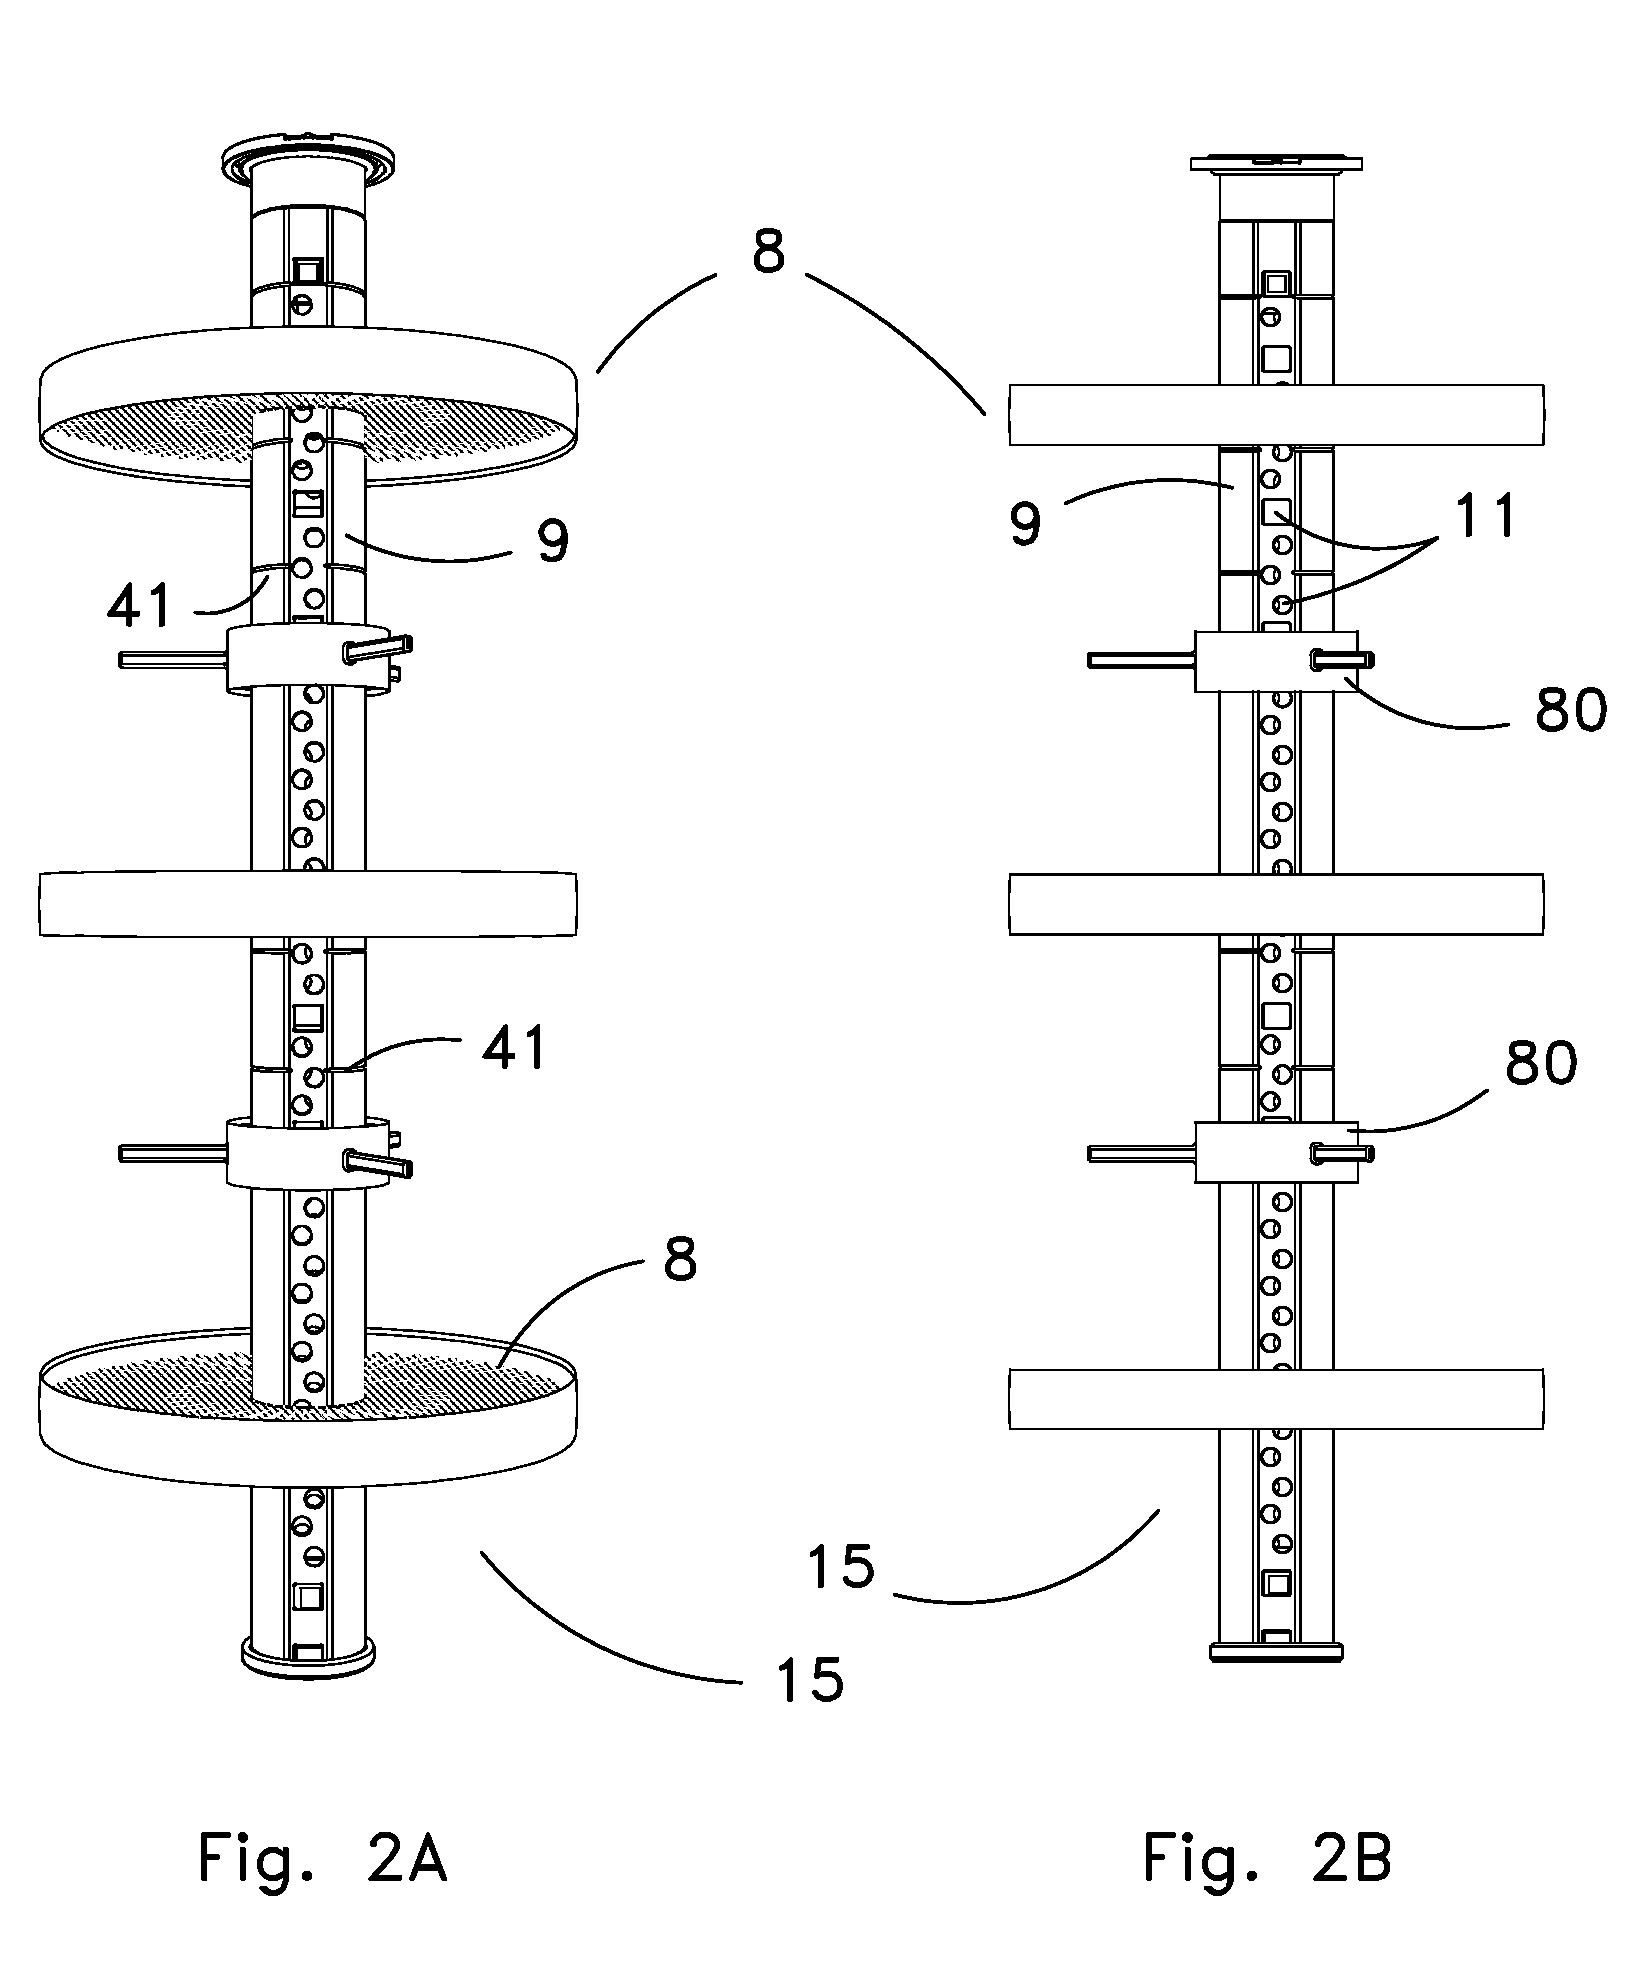 Fluid Filter Apparatus and Methods